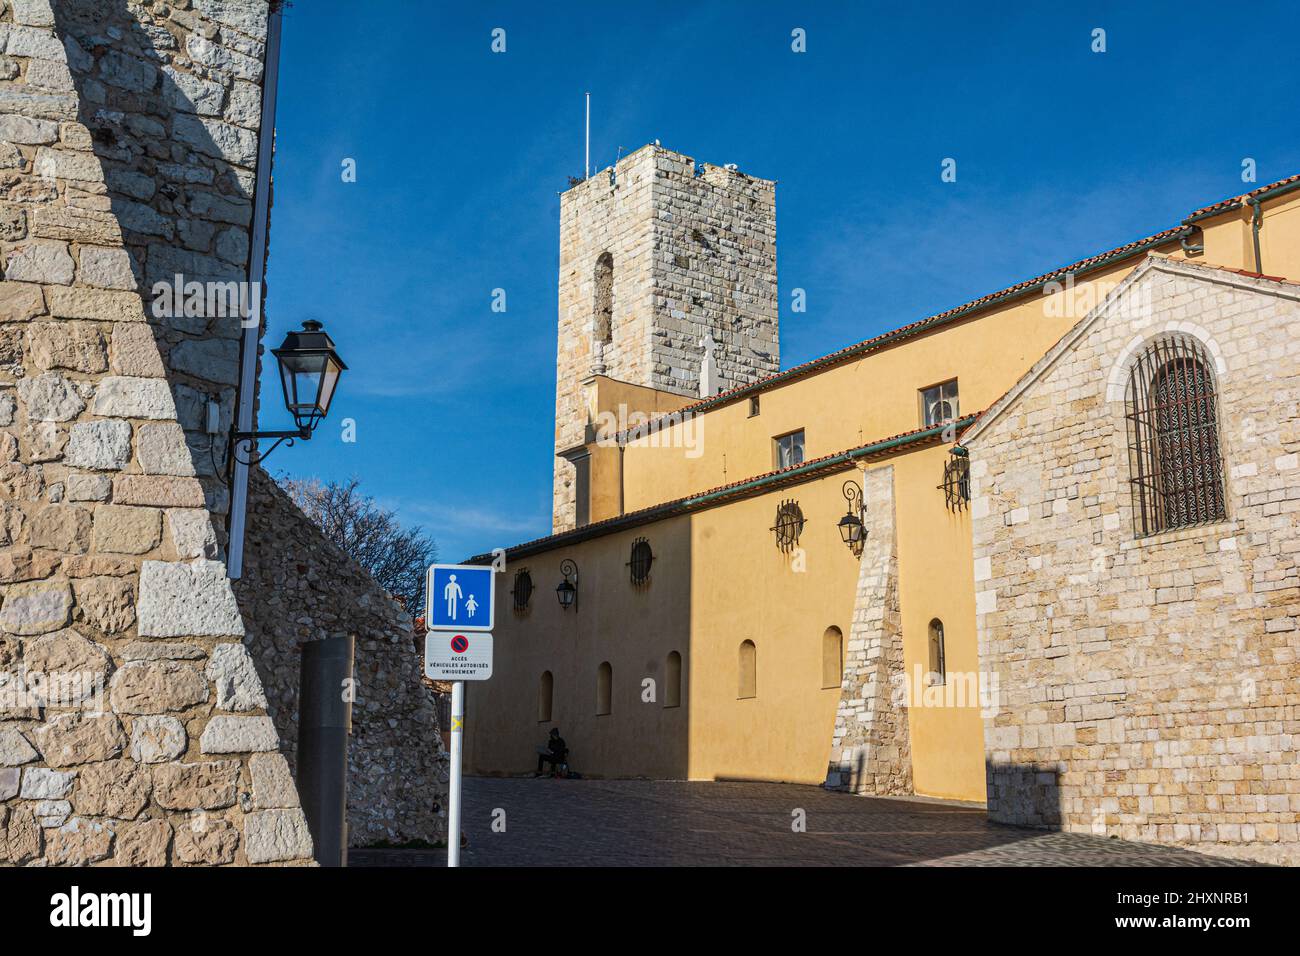 View of the Bell Tower in the old city, Antibes, France Stock Photo